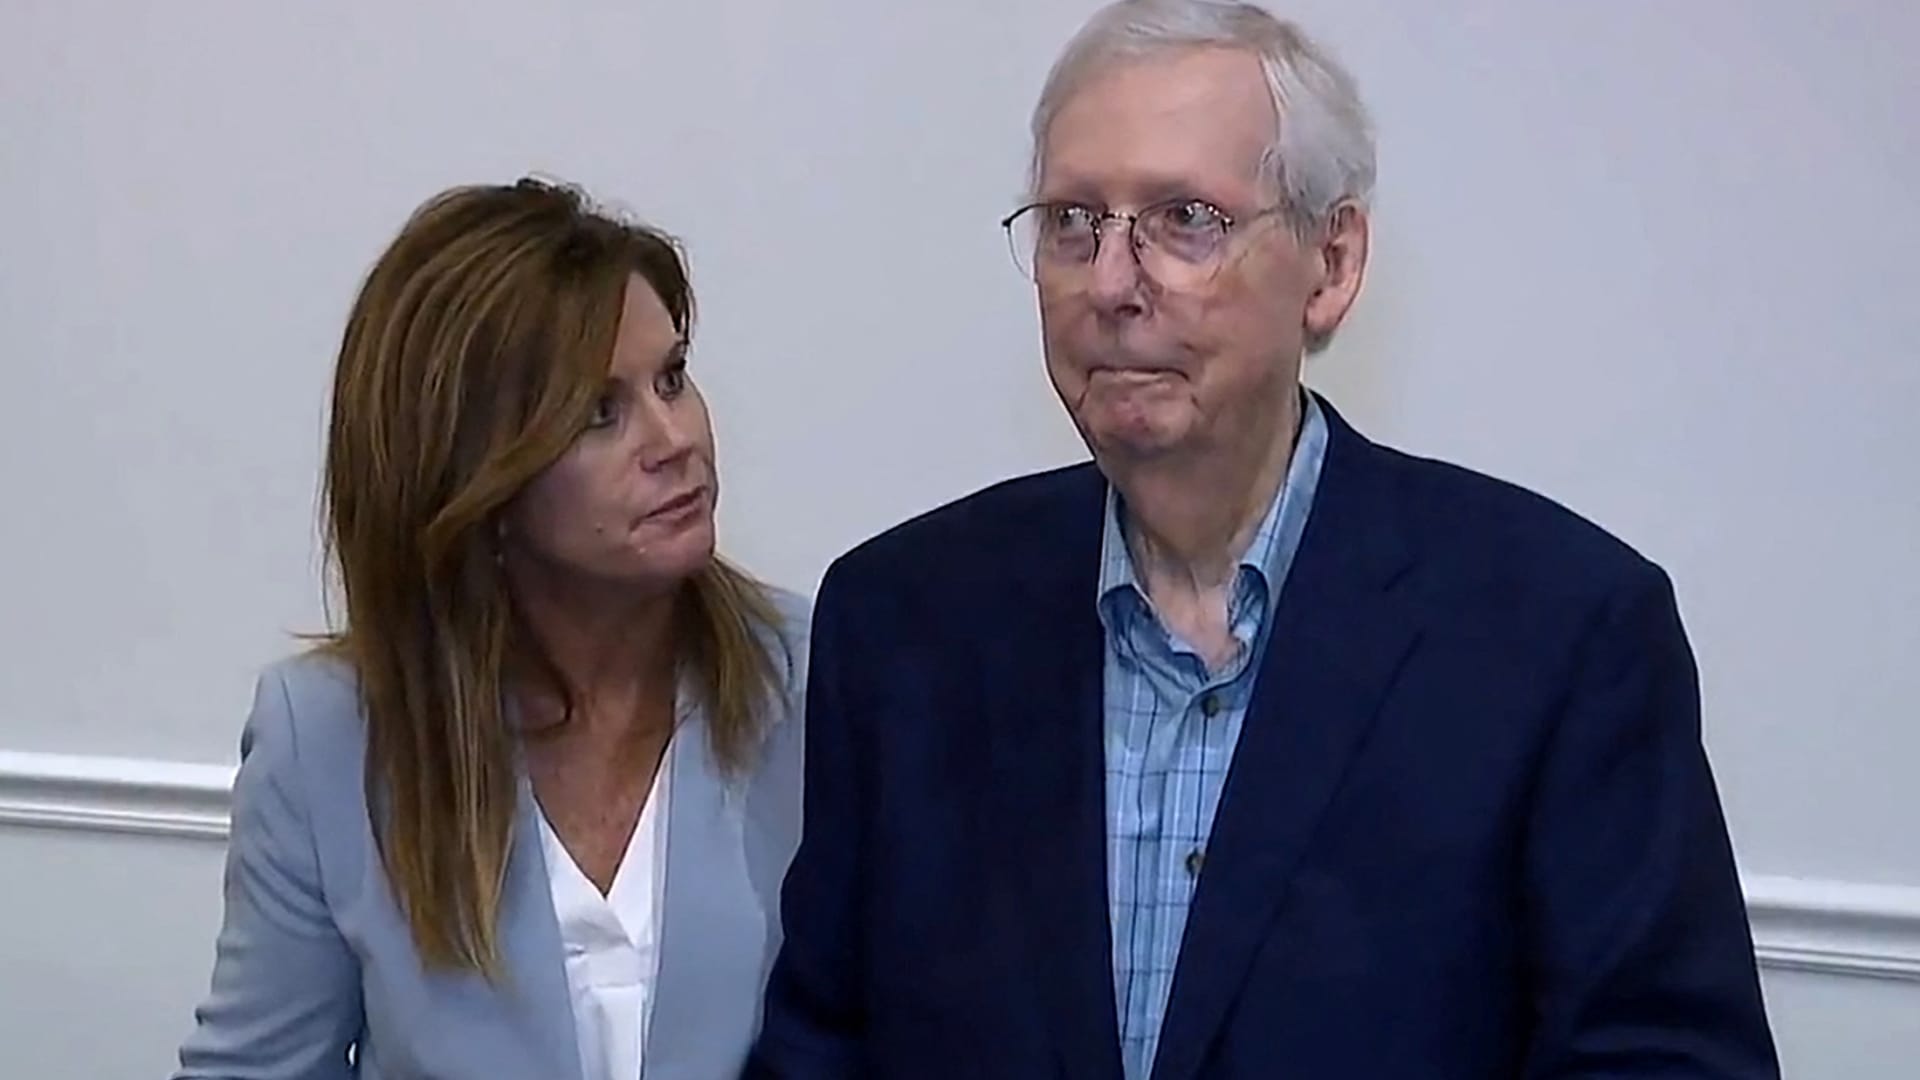 Mitch McConnell brain scans found no stroke, seizures after second freeze, doctor says